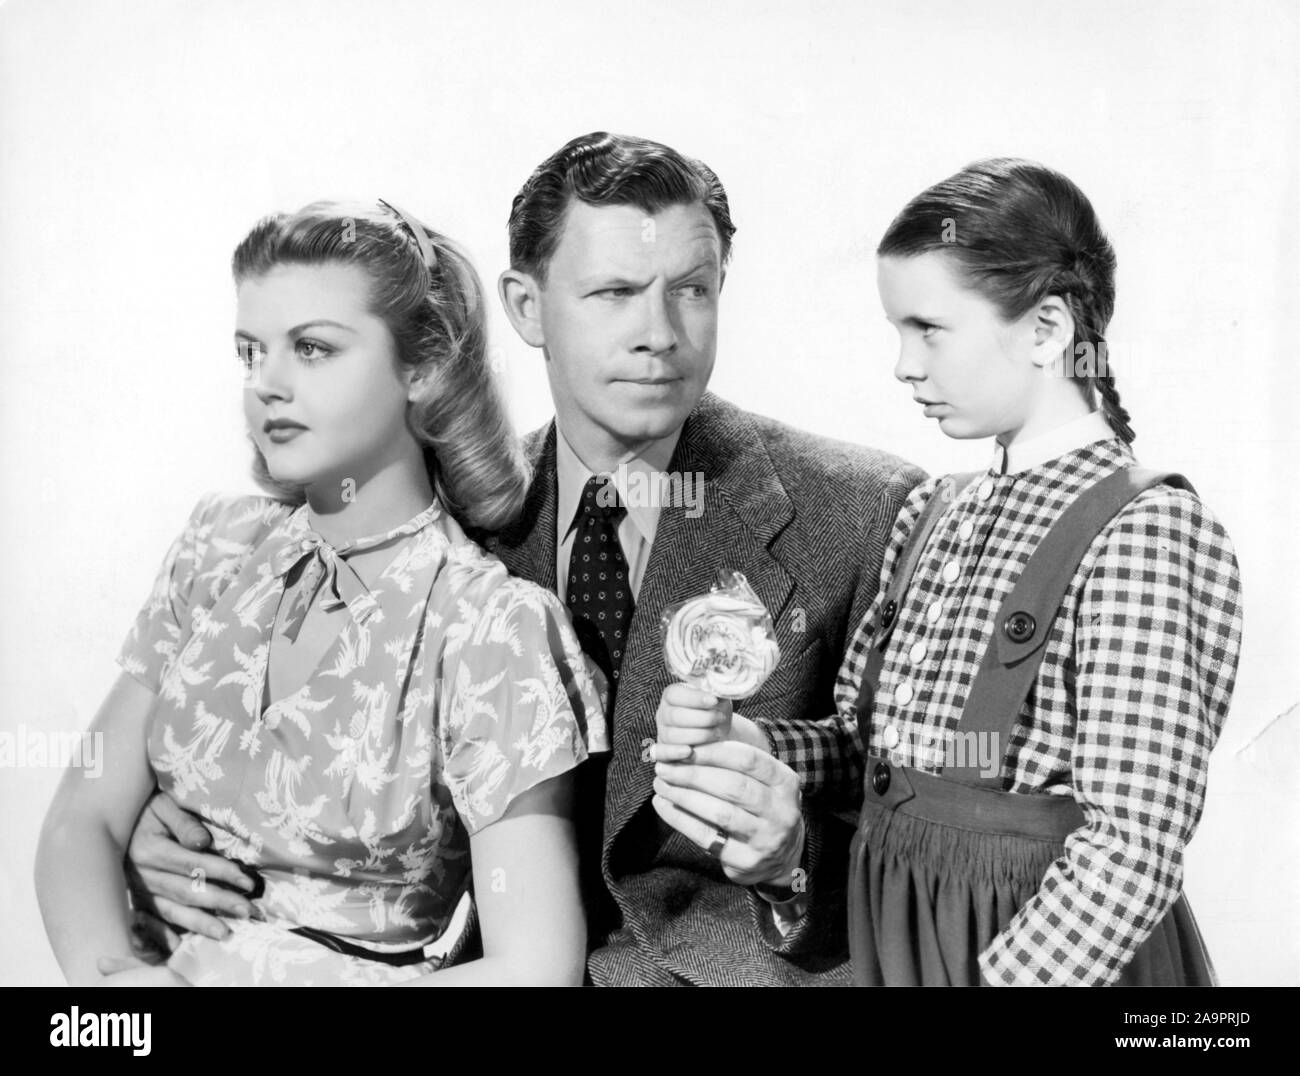 ANGELA LANSBURY, GEORGE MURPHY and MARGARET O'BRIEN in TENTH AVENUE ANGEL (1948), directed by ROY ROWLAND. Credit: M.G.M / Album Stock Photo